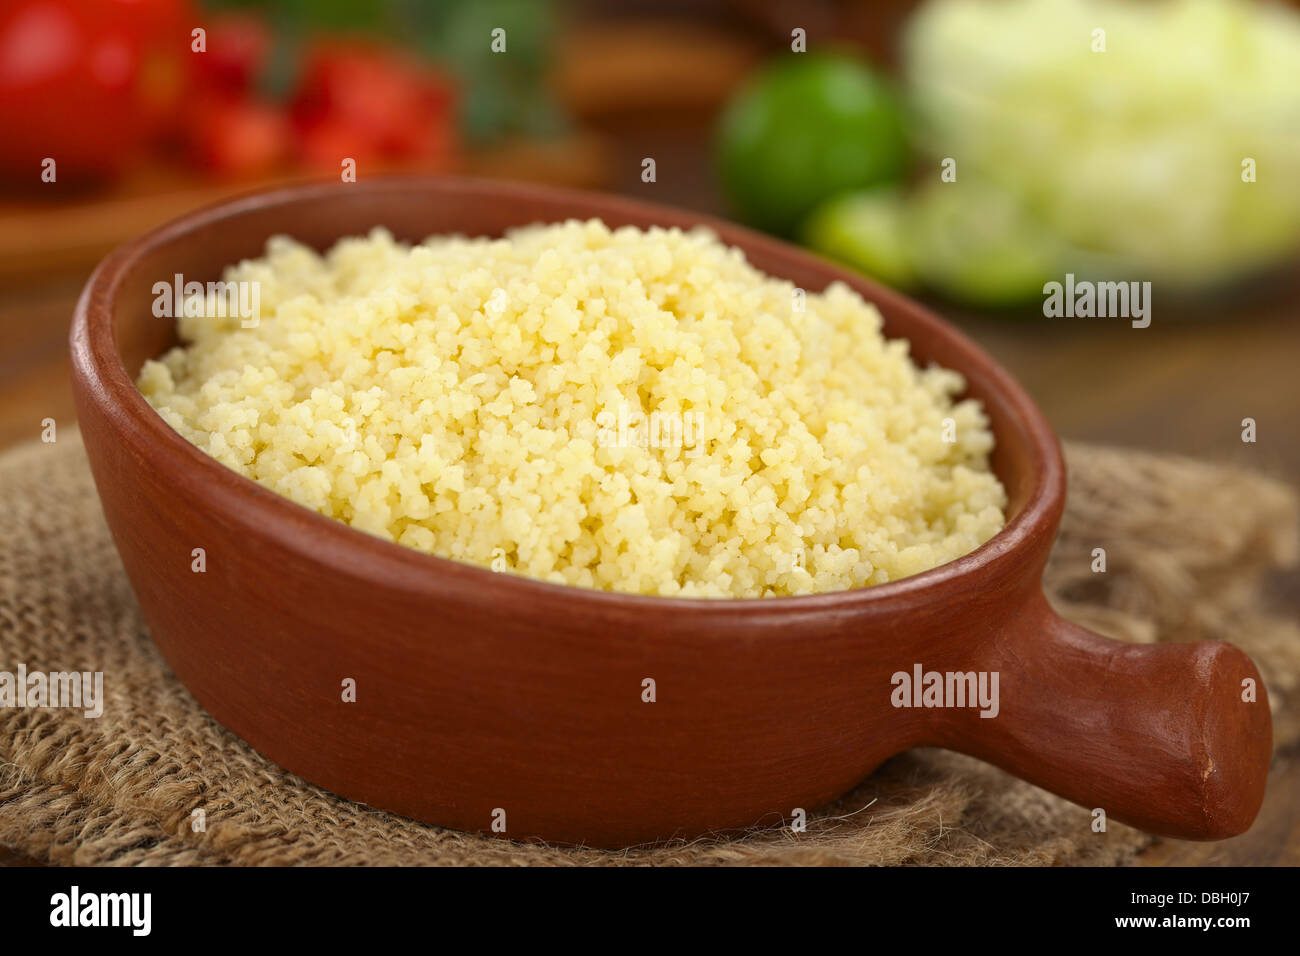 Prepared couscous in rustic bowl (Selective Focus, Focus one third into the couscous) Stock Photo